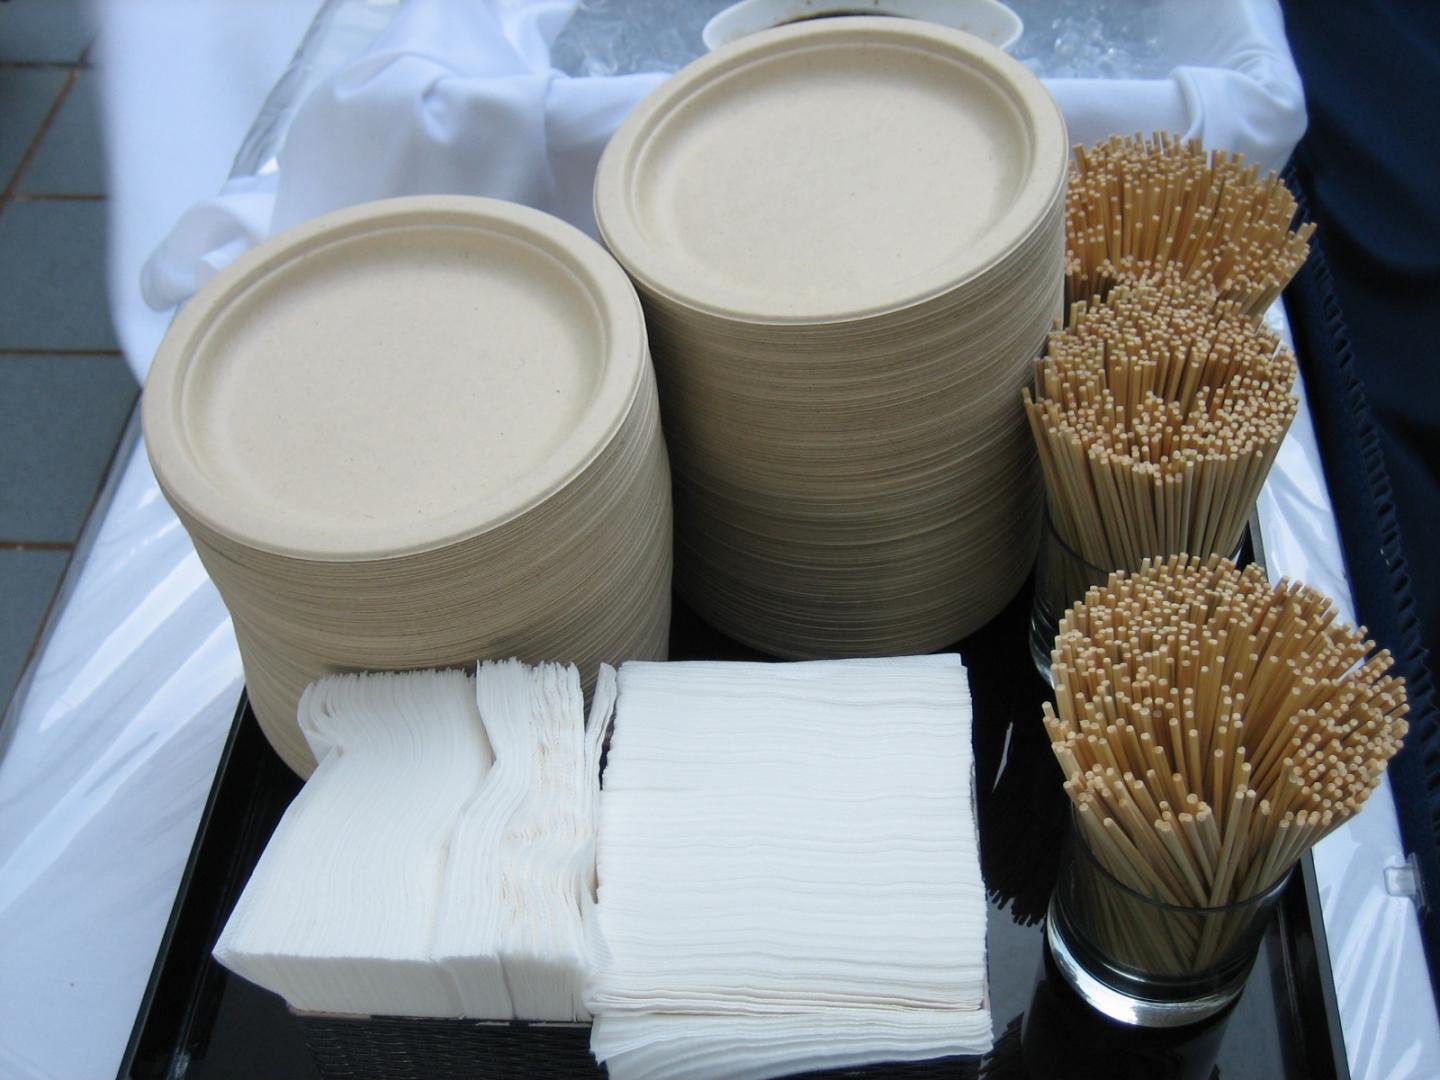 Plates, napkins and sticks that can be composted	